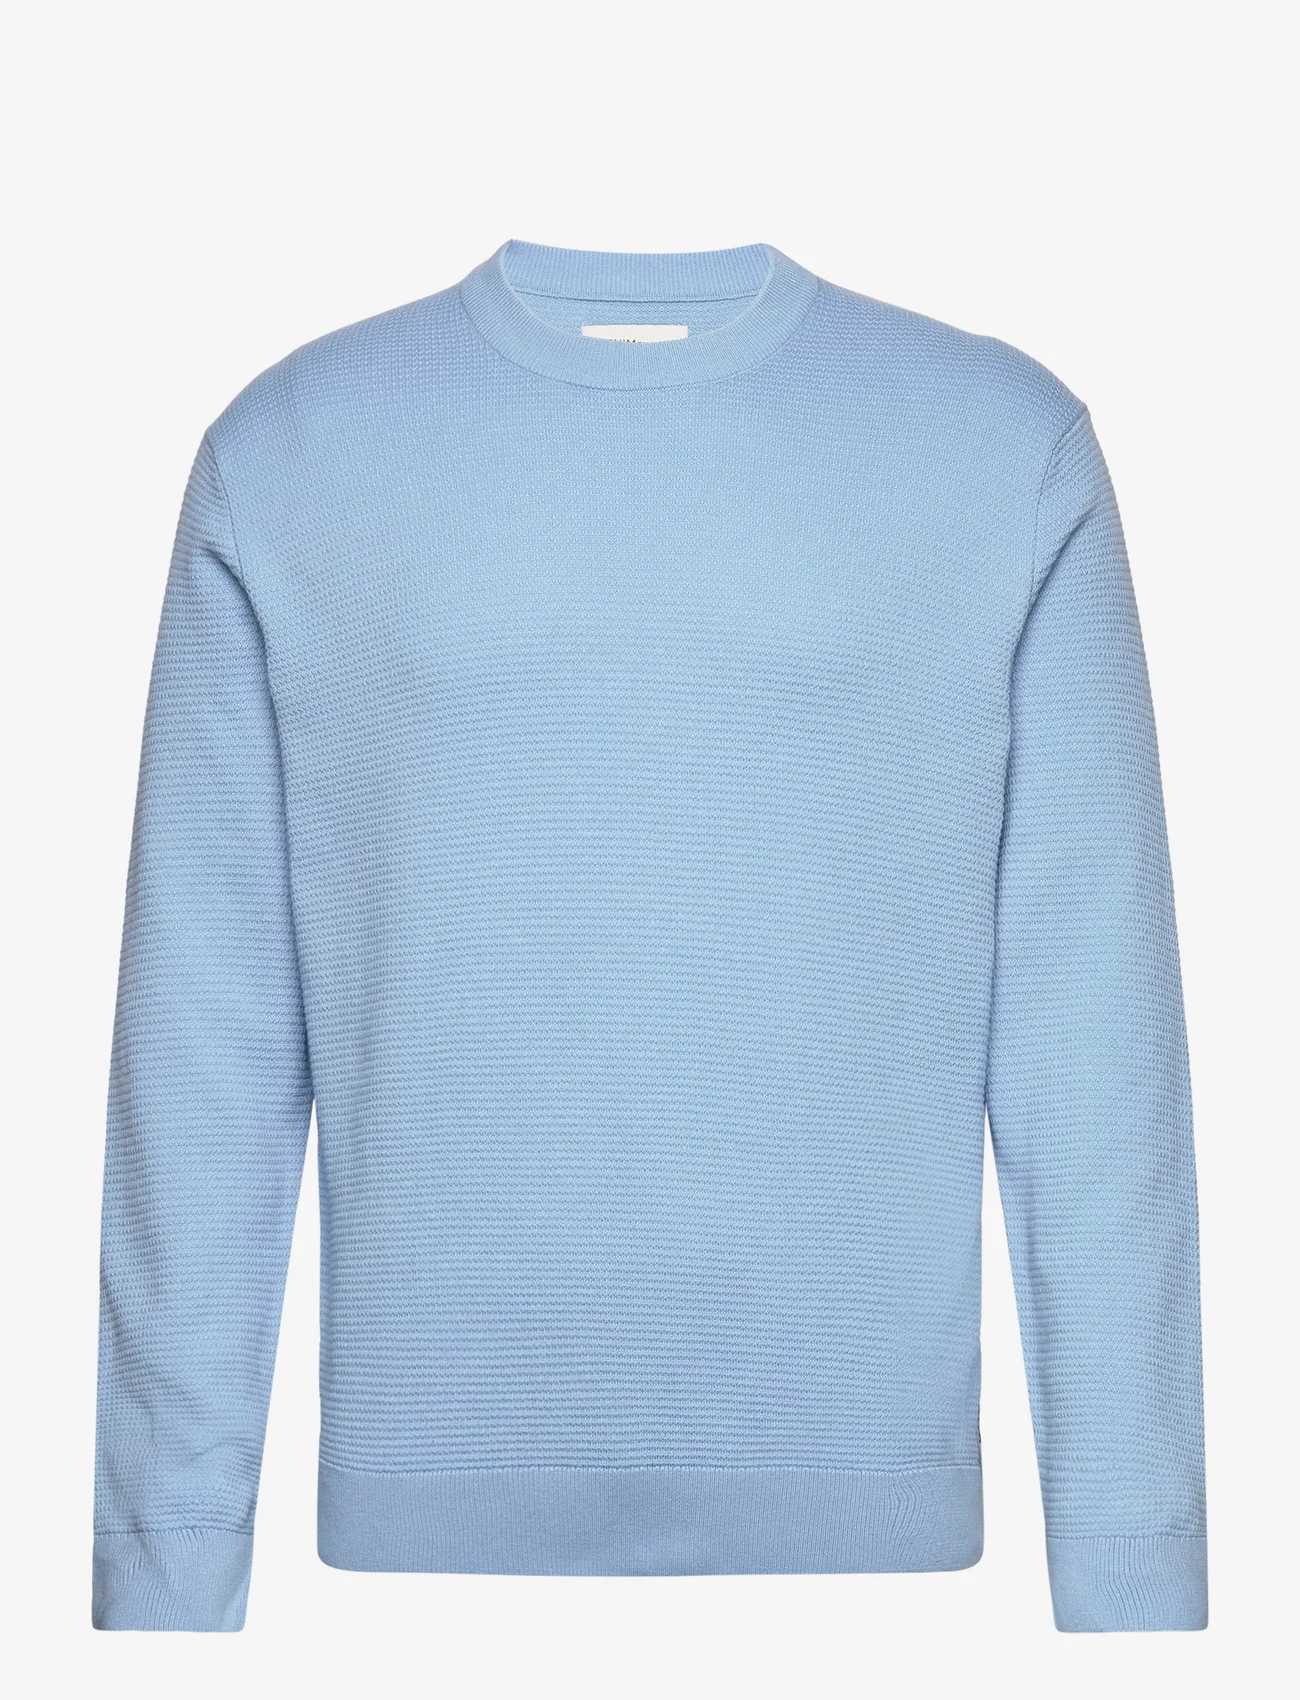 Tom Tailor - structured basic knit - rund hals - washed out middle blue - 0